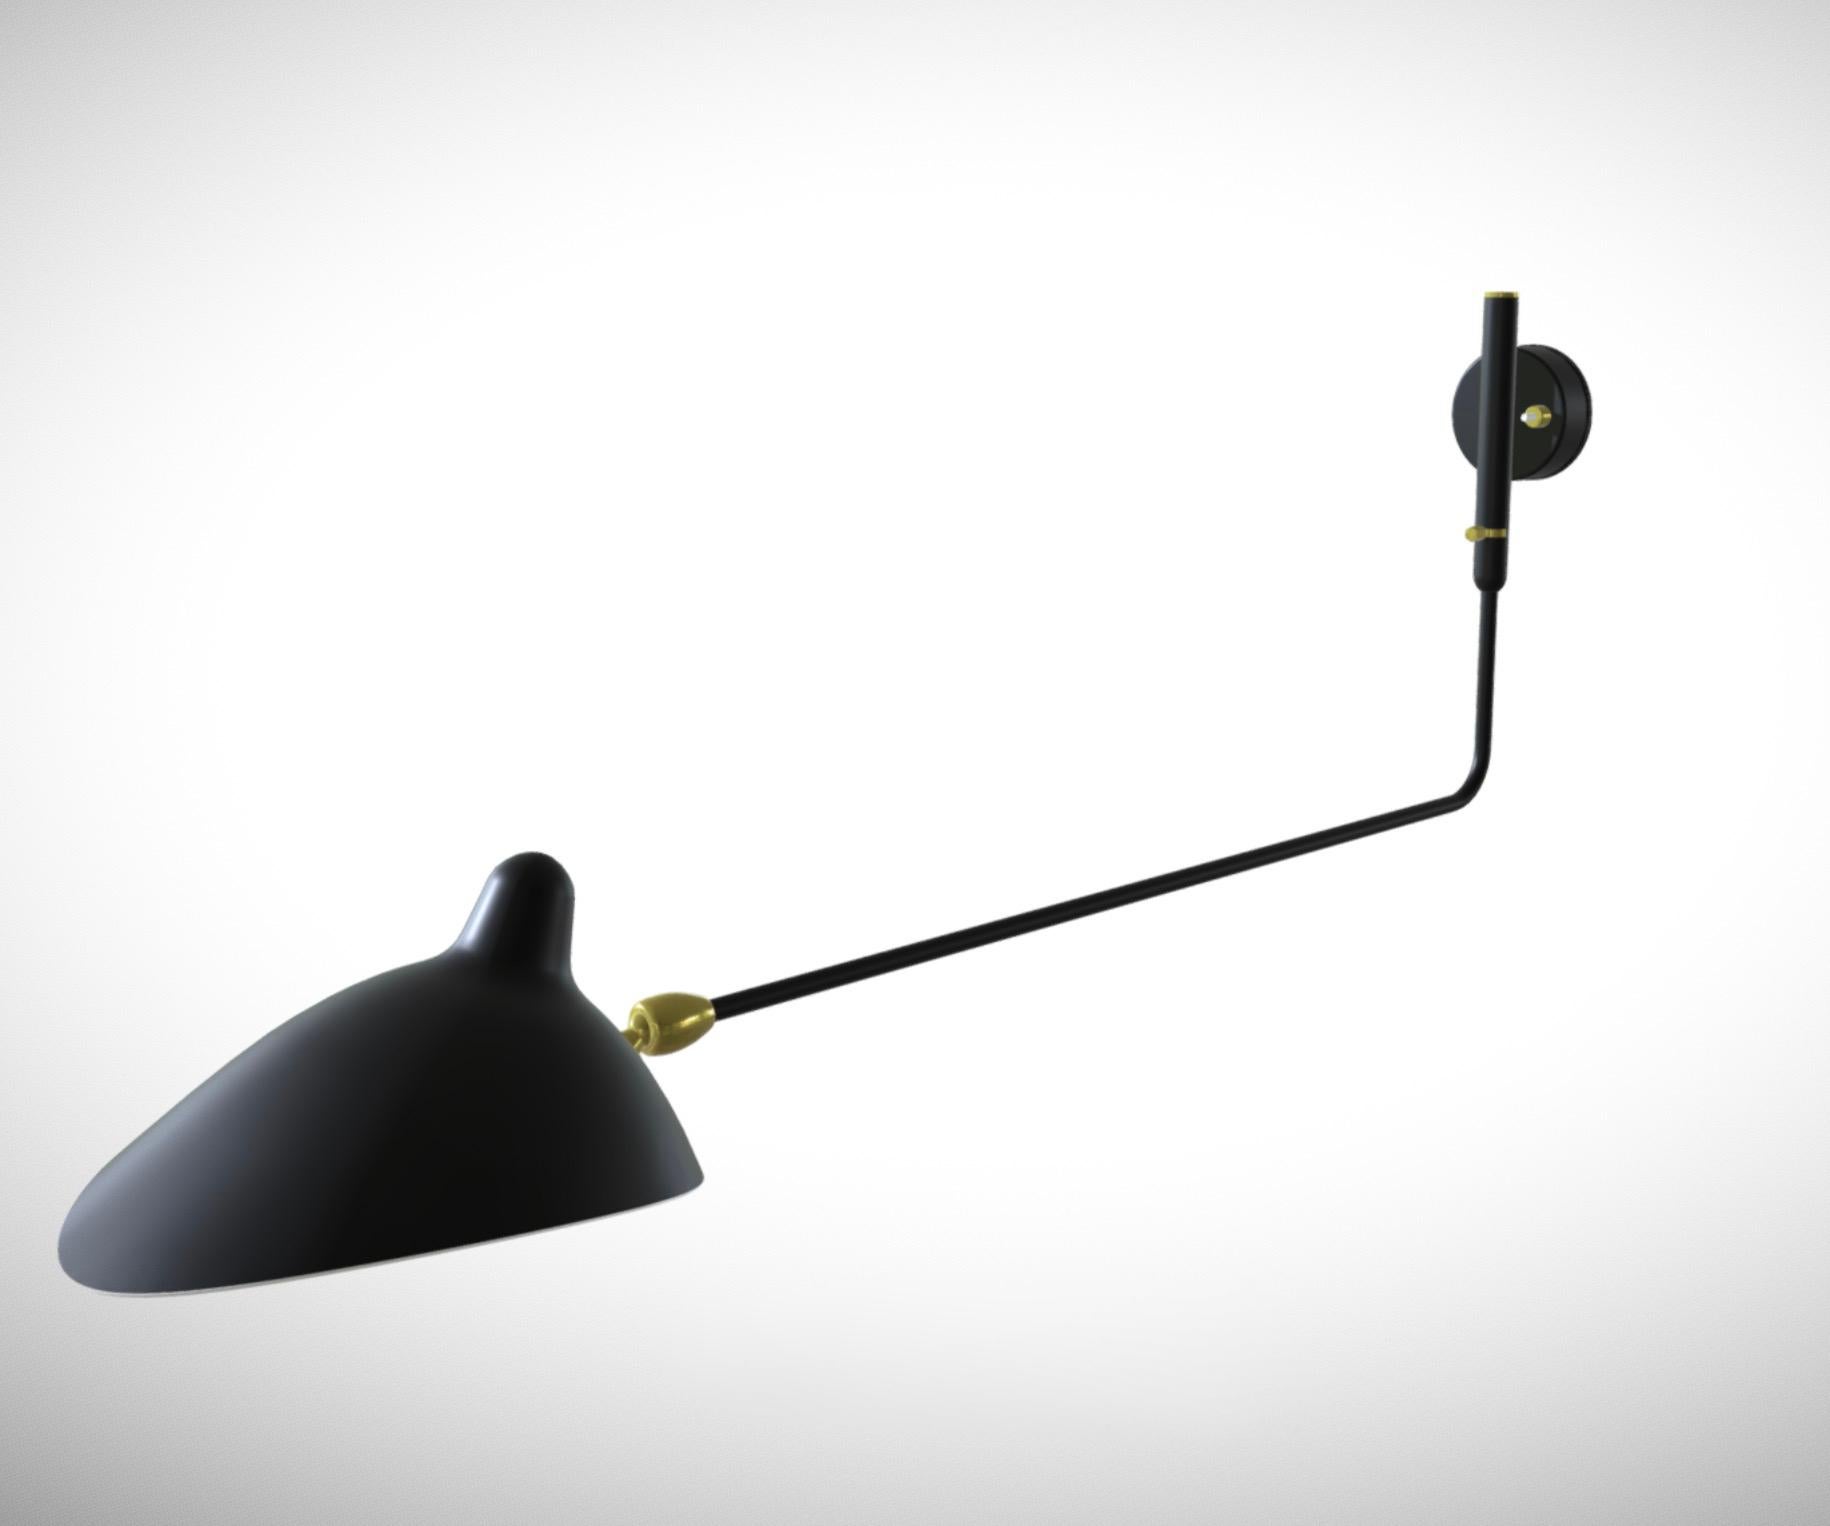 Serge Mouille 'Applique Un Bras Droit Pivotant' wall light in black.

Originally designed in 1954, this iconic wall light is still made by Edition Serge Mouille in France using many of the same small-scale manufacturing techniques and scrupulous